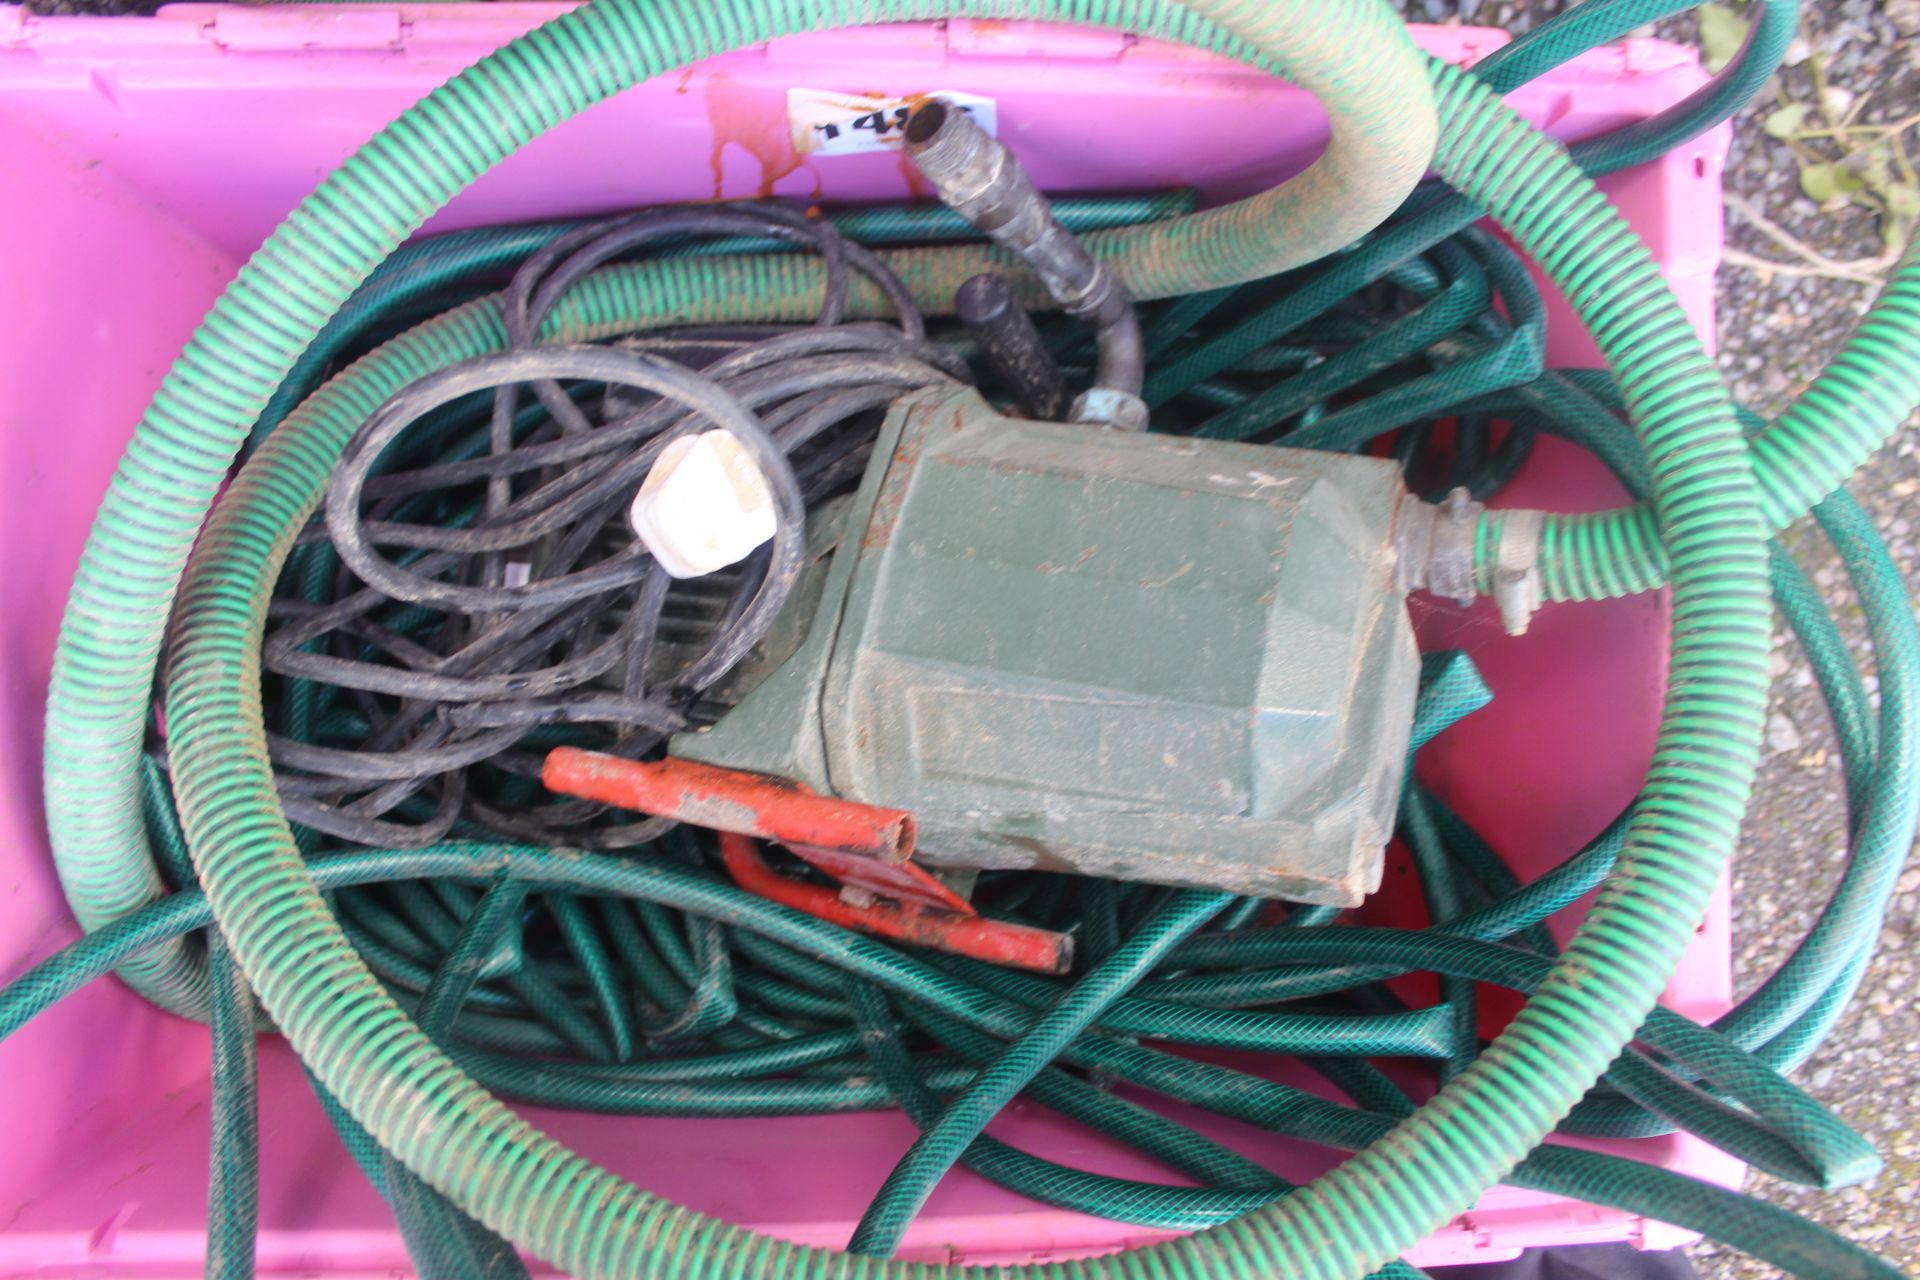 Water pump and hose. - Image 3 of 3